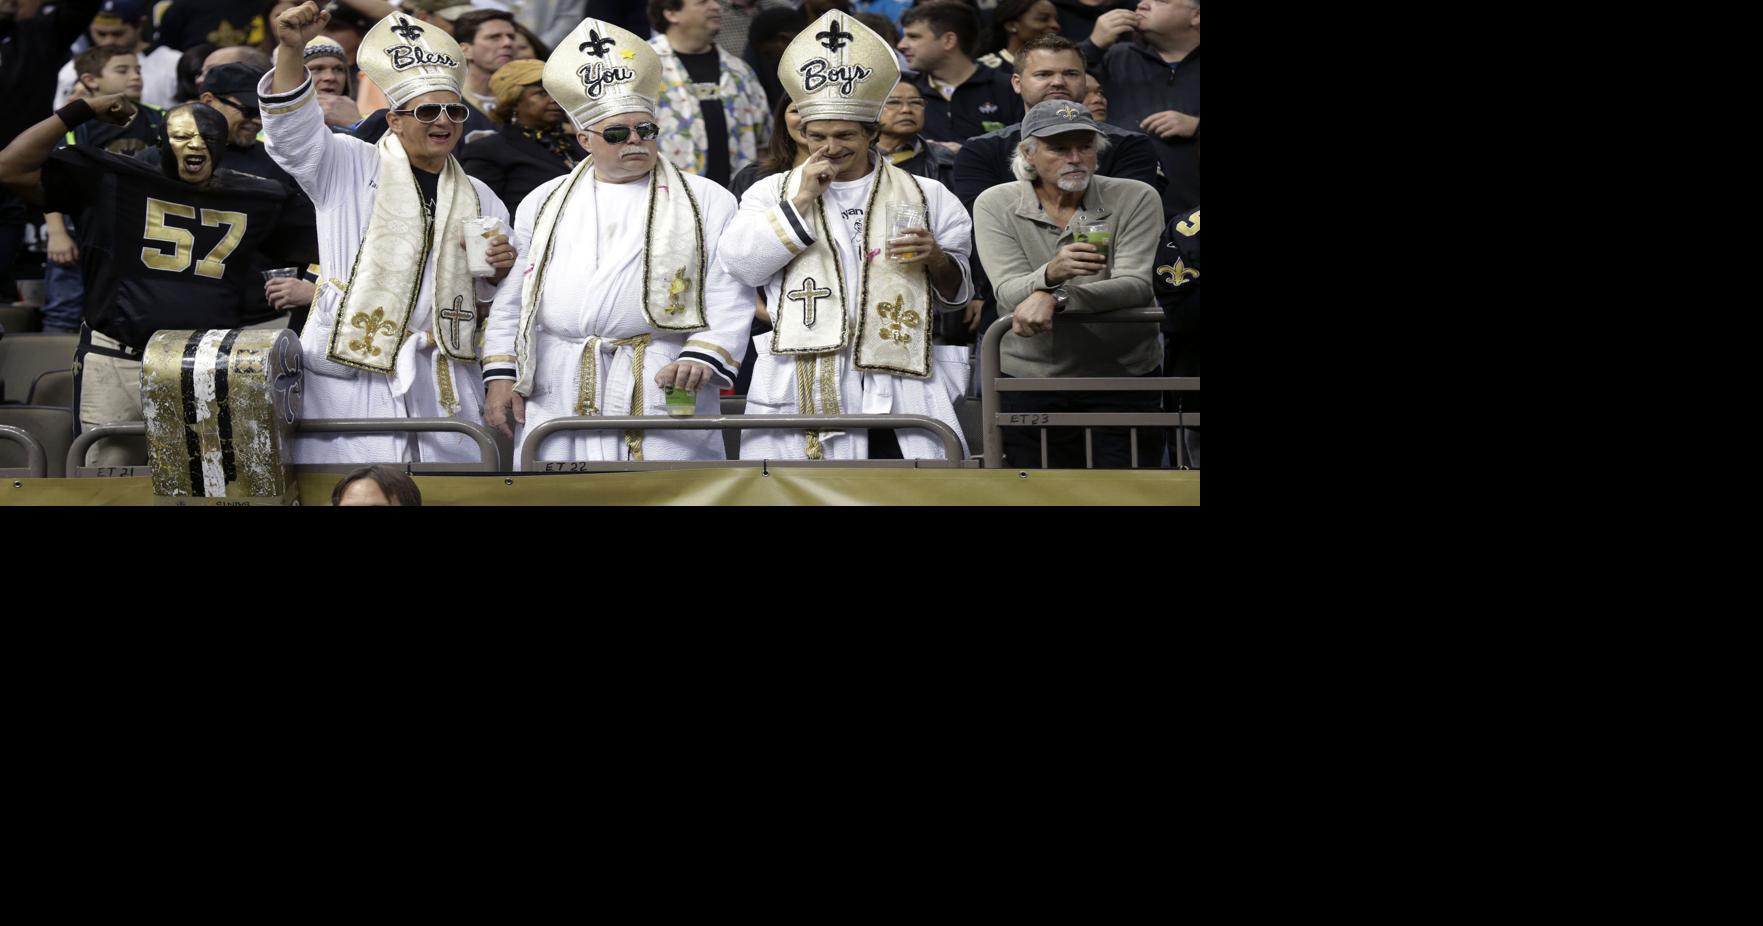 What happens when Saints superfans, like 2 of the 3 Bless You Boys